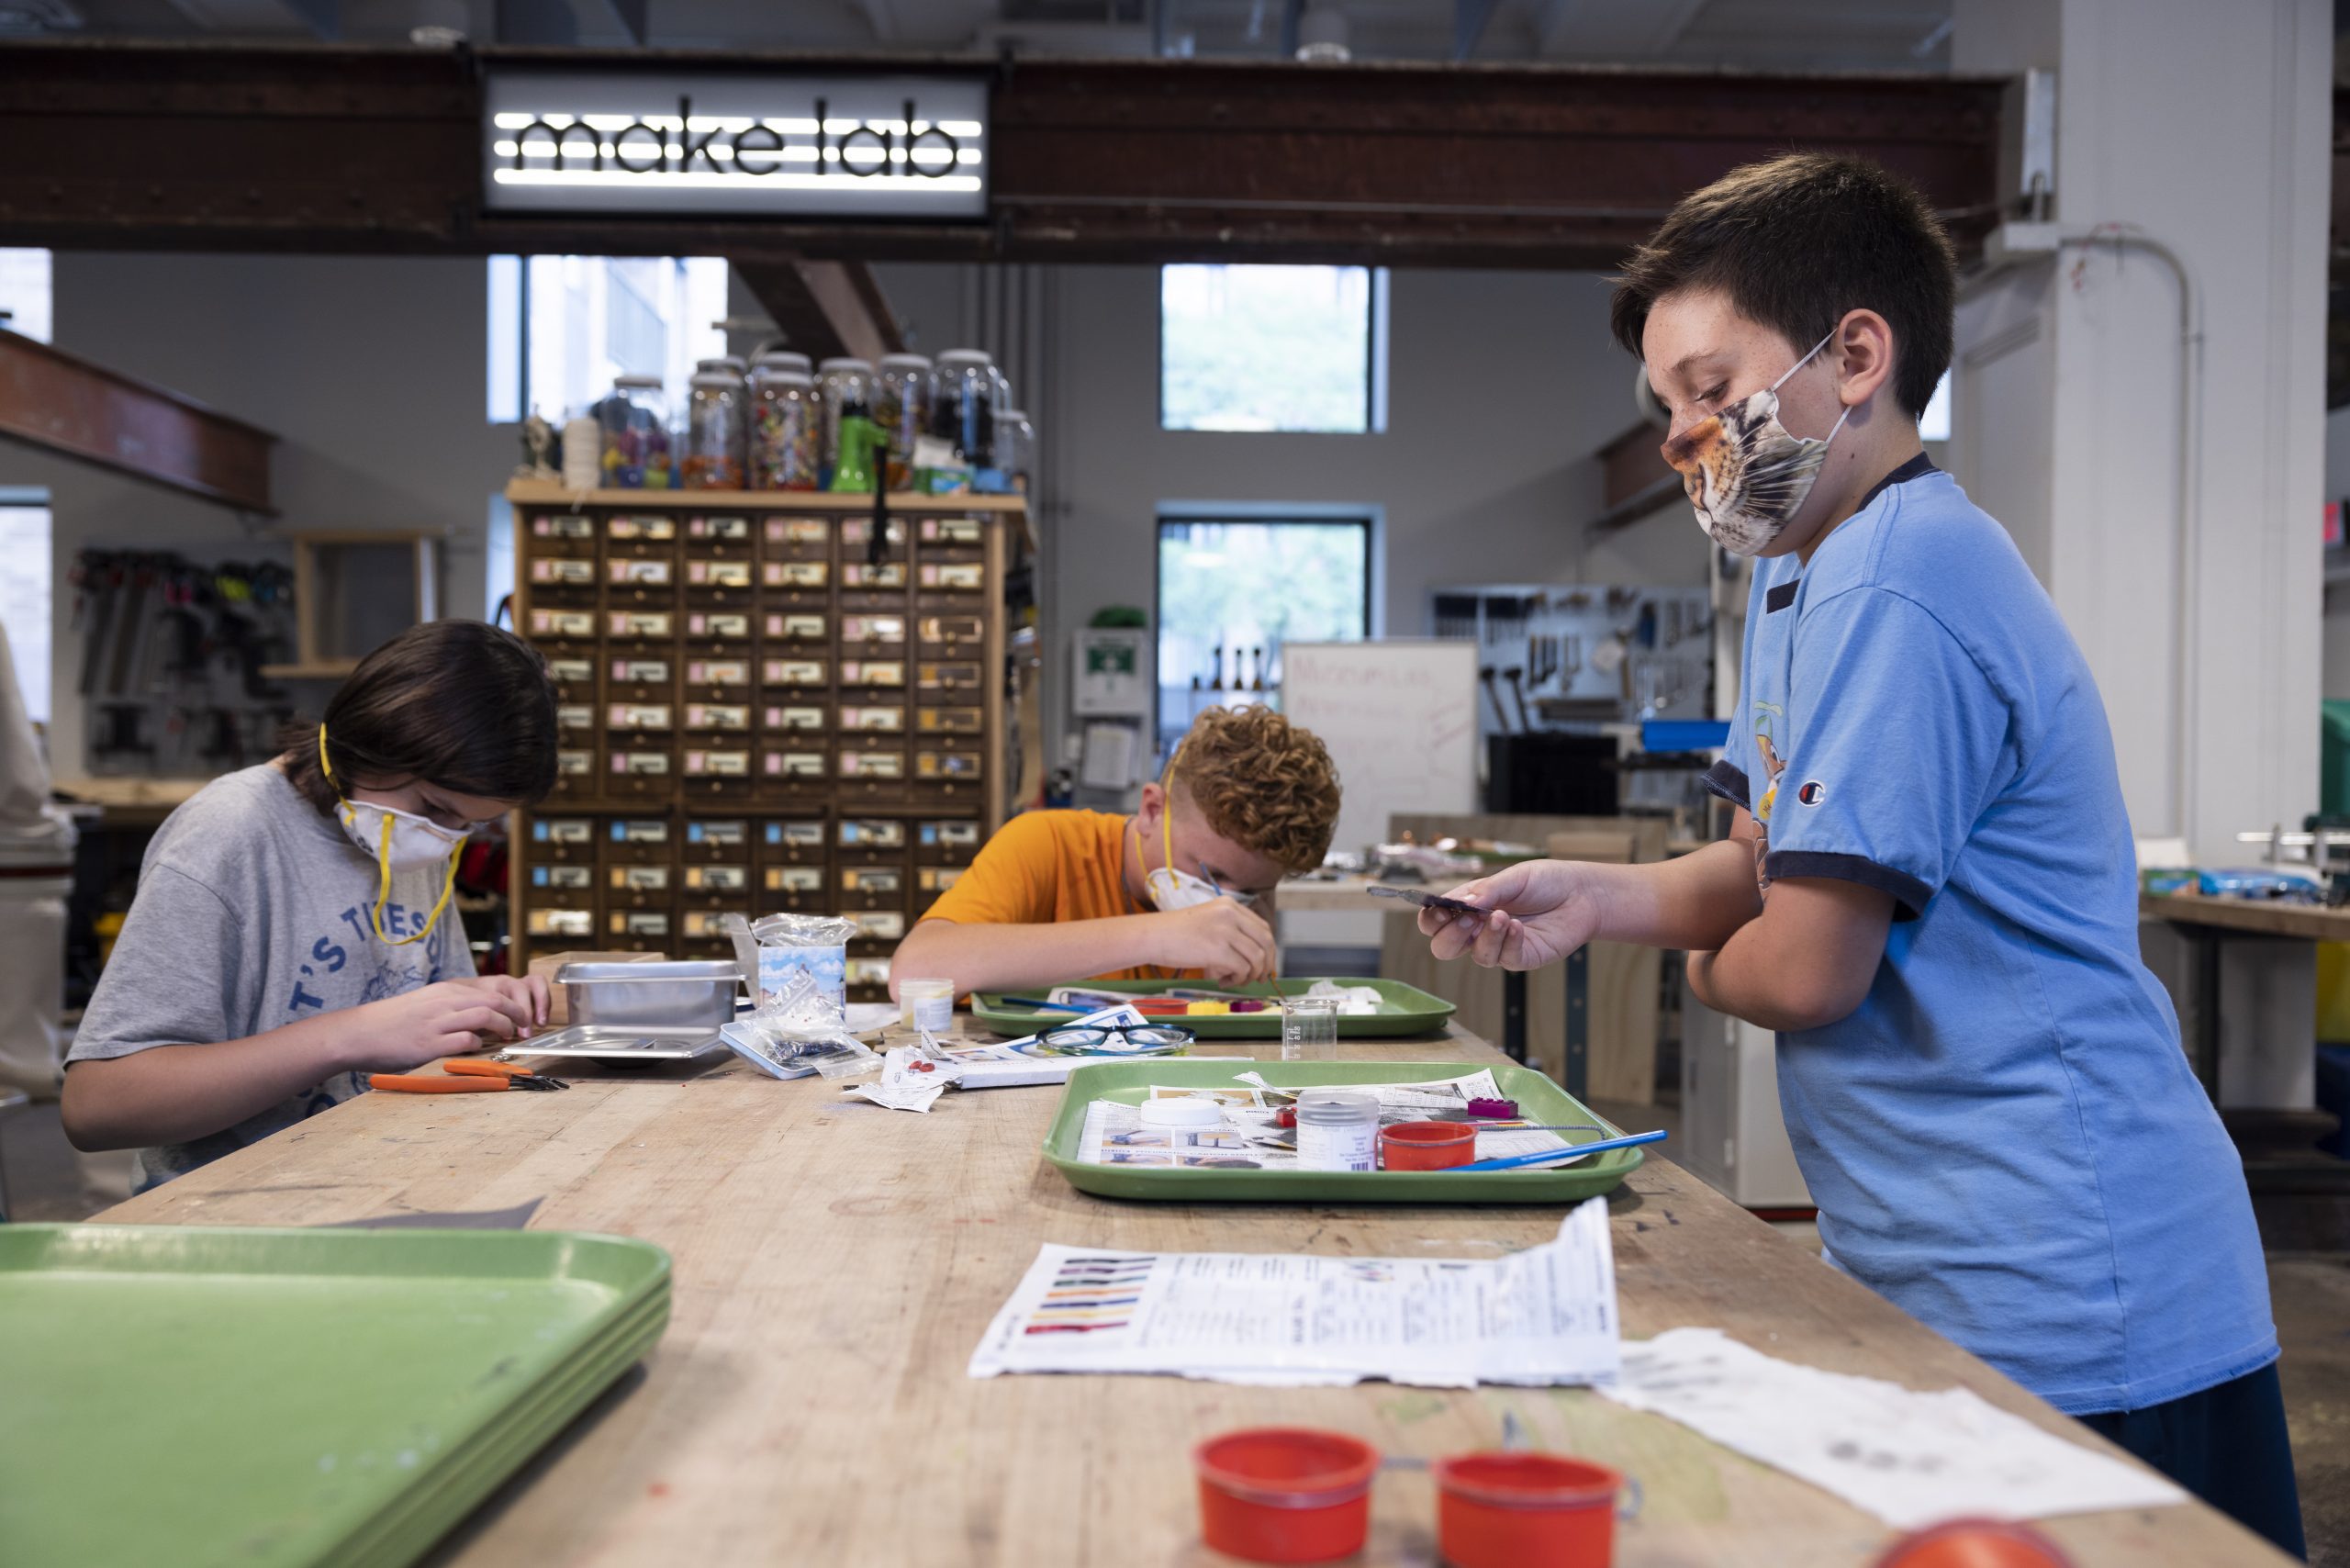 Three young people are working around a table. They are using glass enameling dust and sifters on top of green trays lined with newspaper.